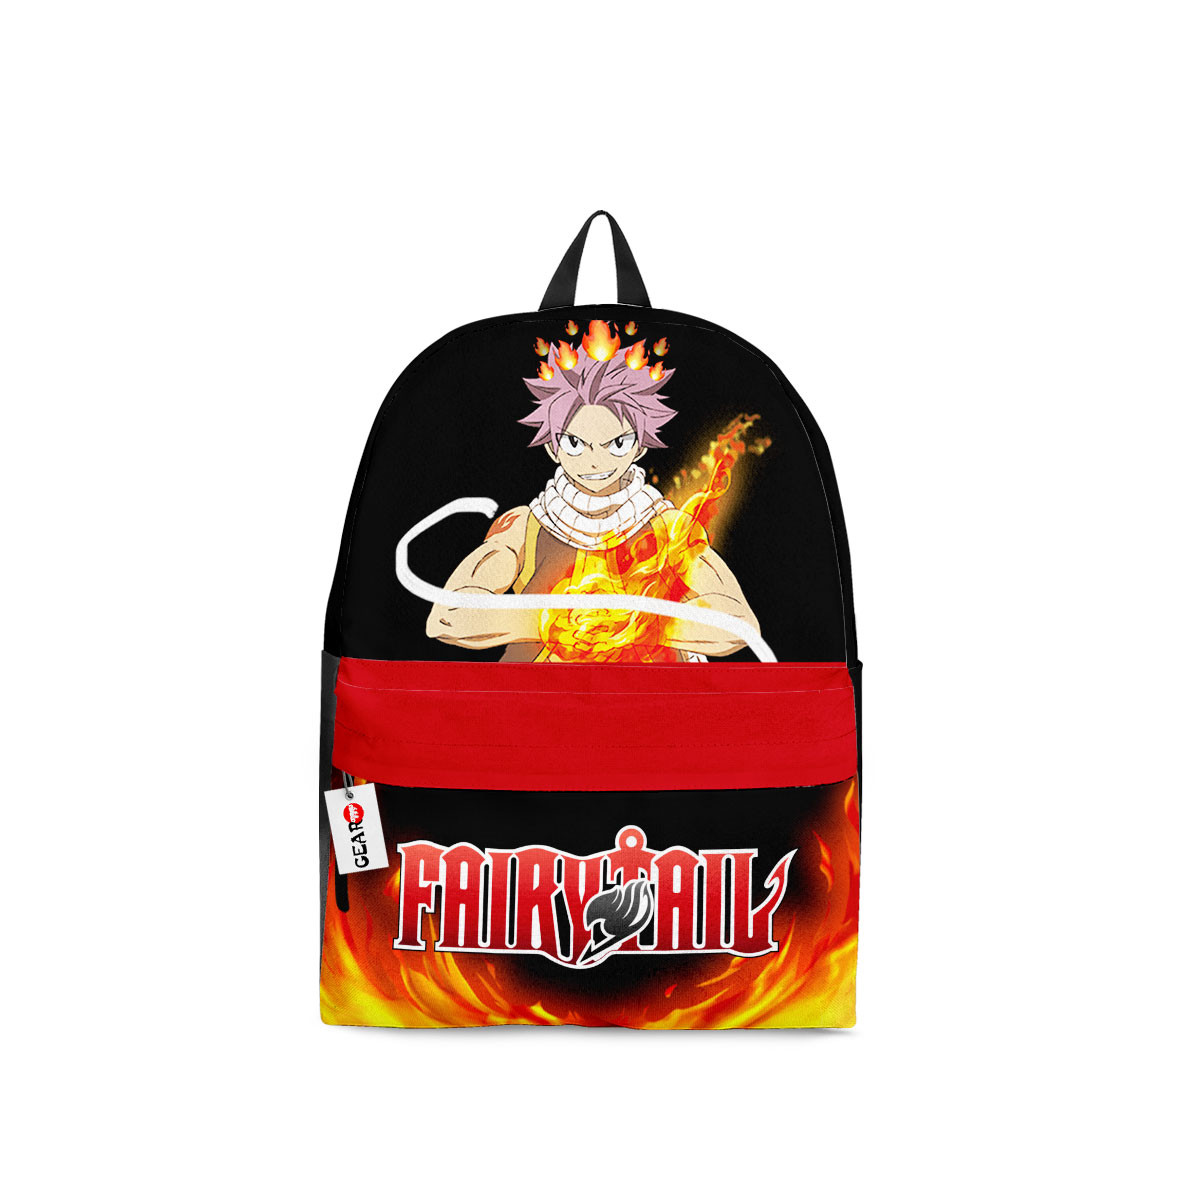 Latest Anime style products 116